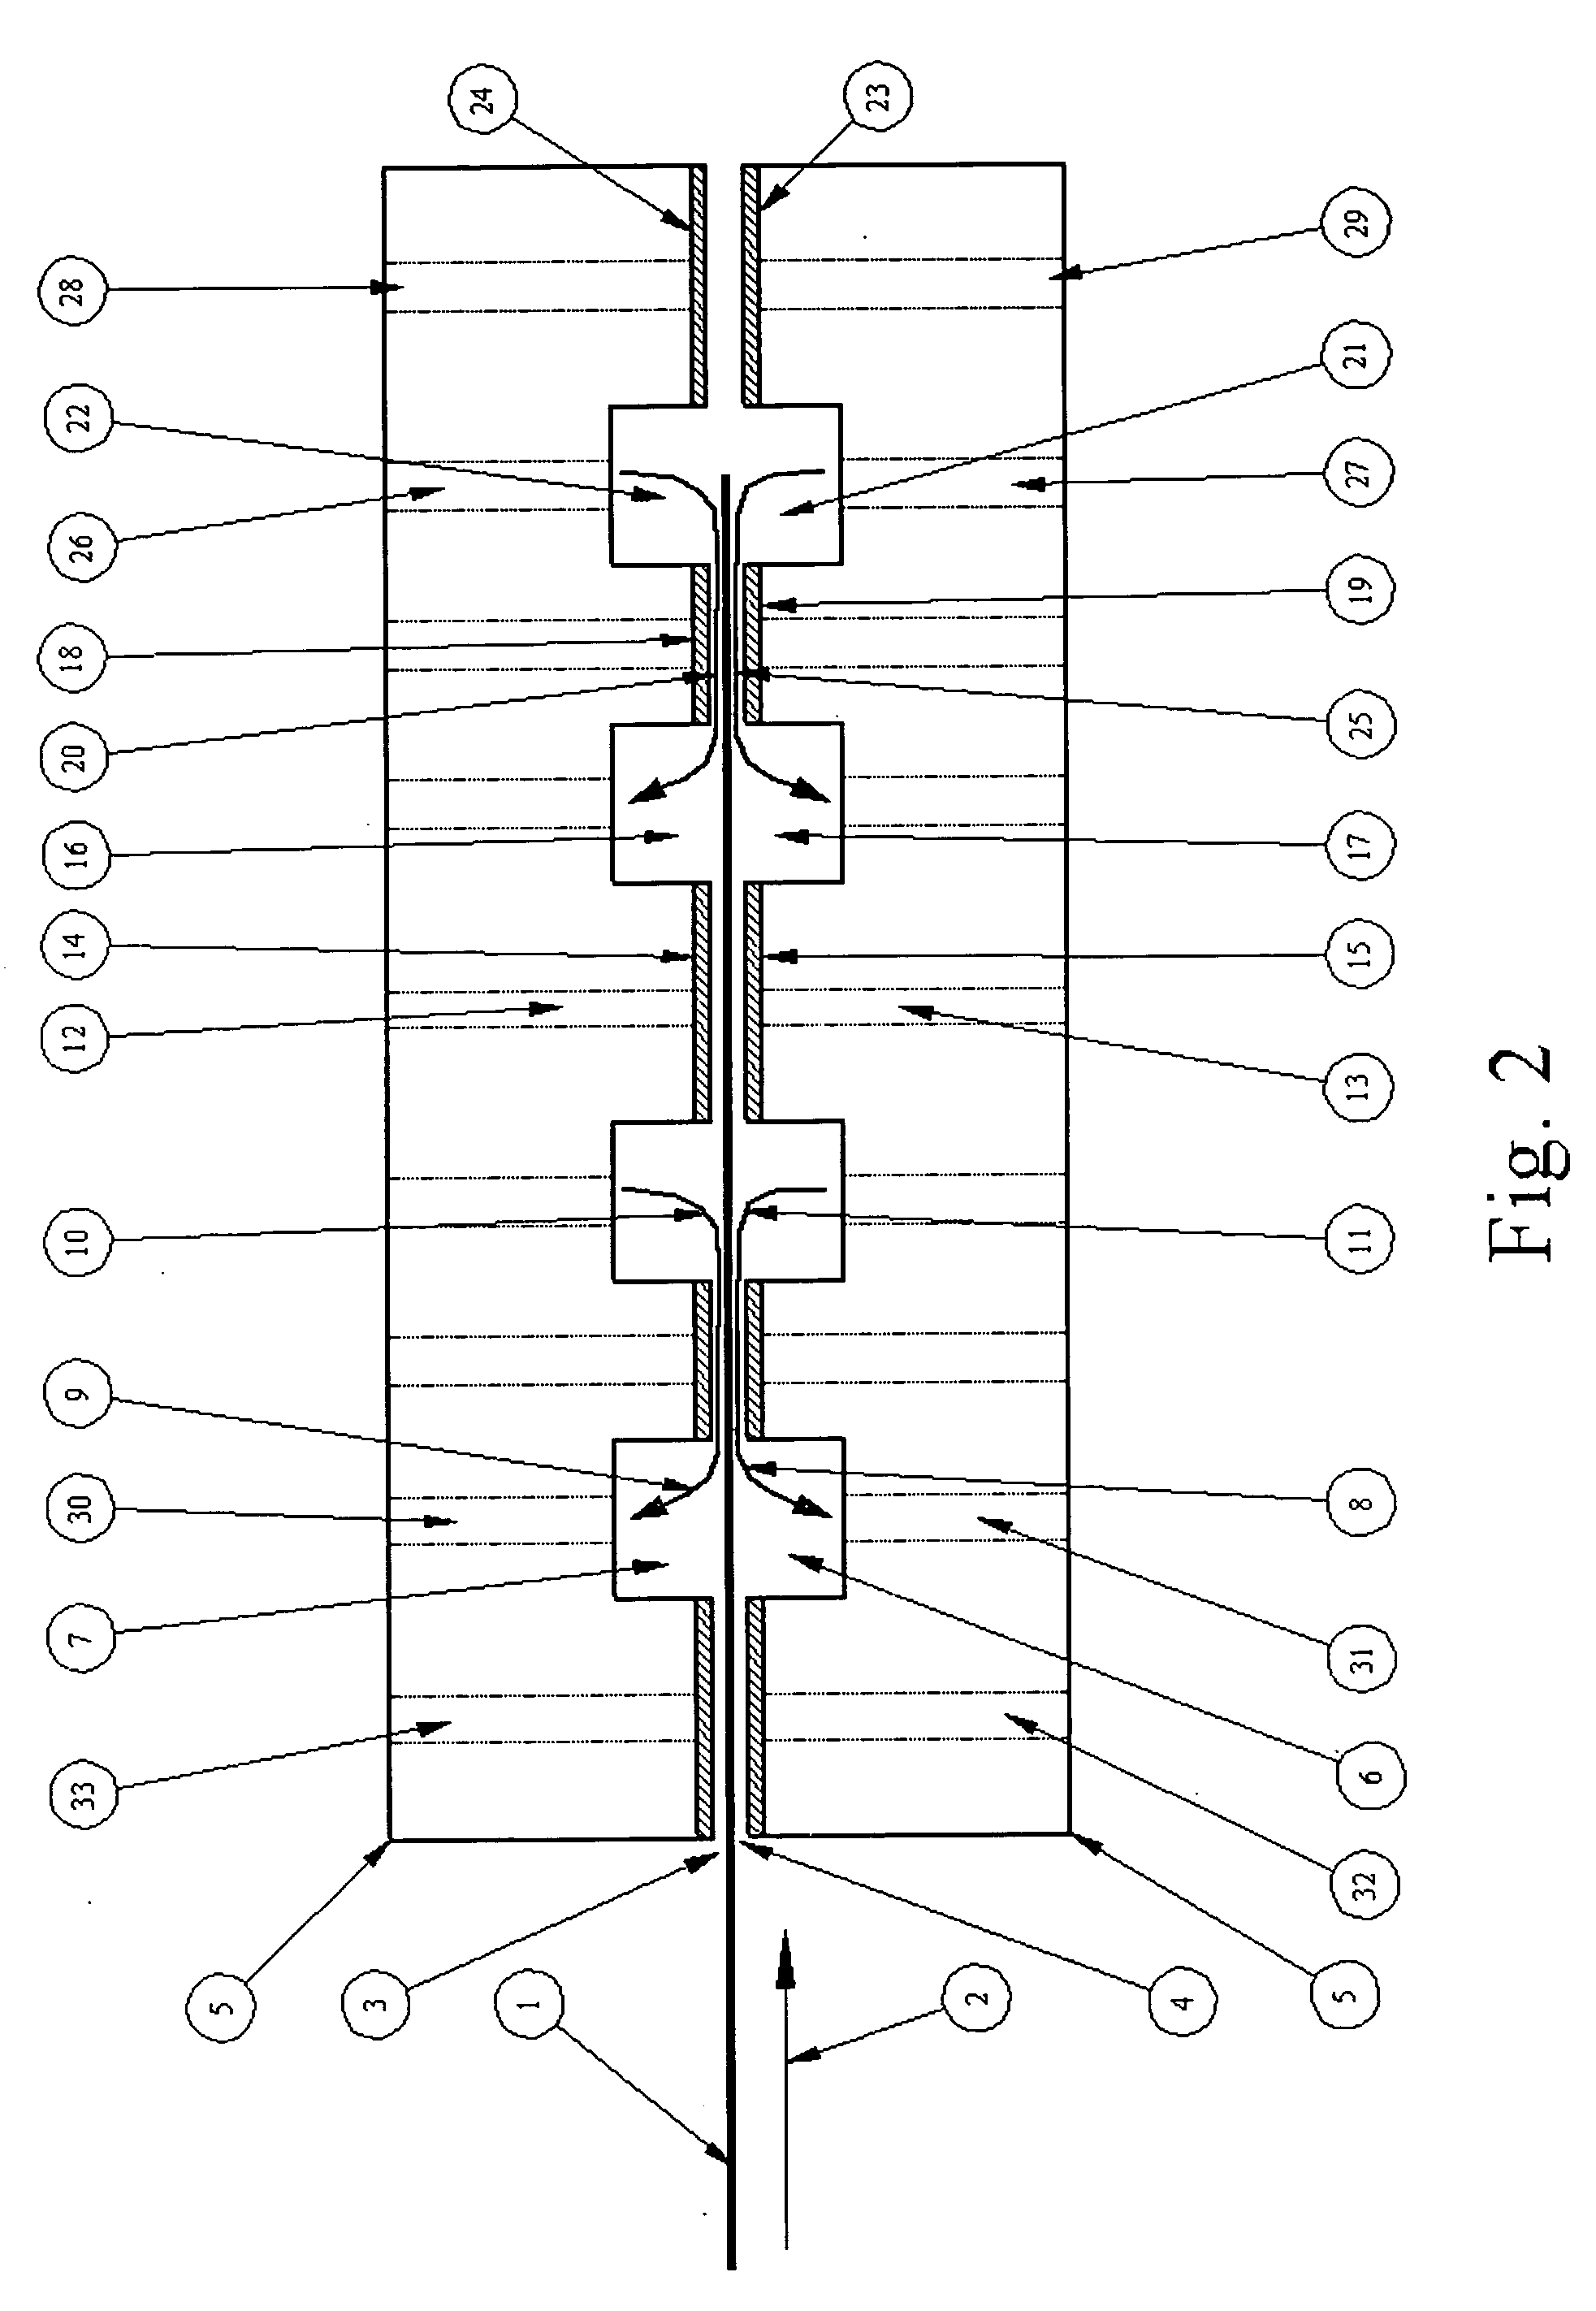 Method and apparatus for in-line processing and immediately sequential or simultaneous processing of flat and flexible substrates through viscous shear in thin cross section gaps for the manufacture of micro-electronic circuits or displays